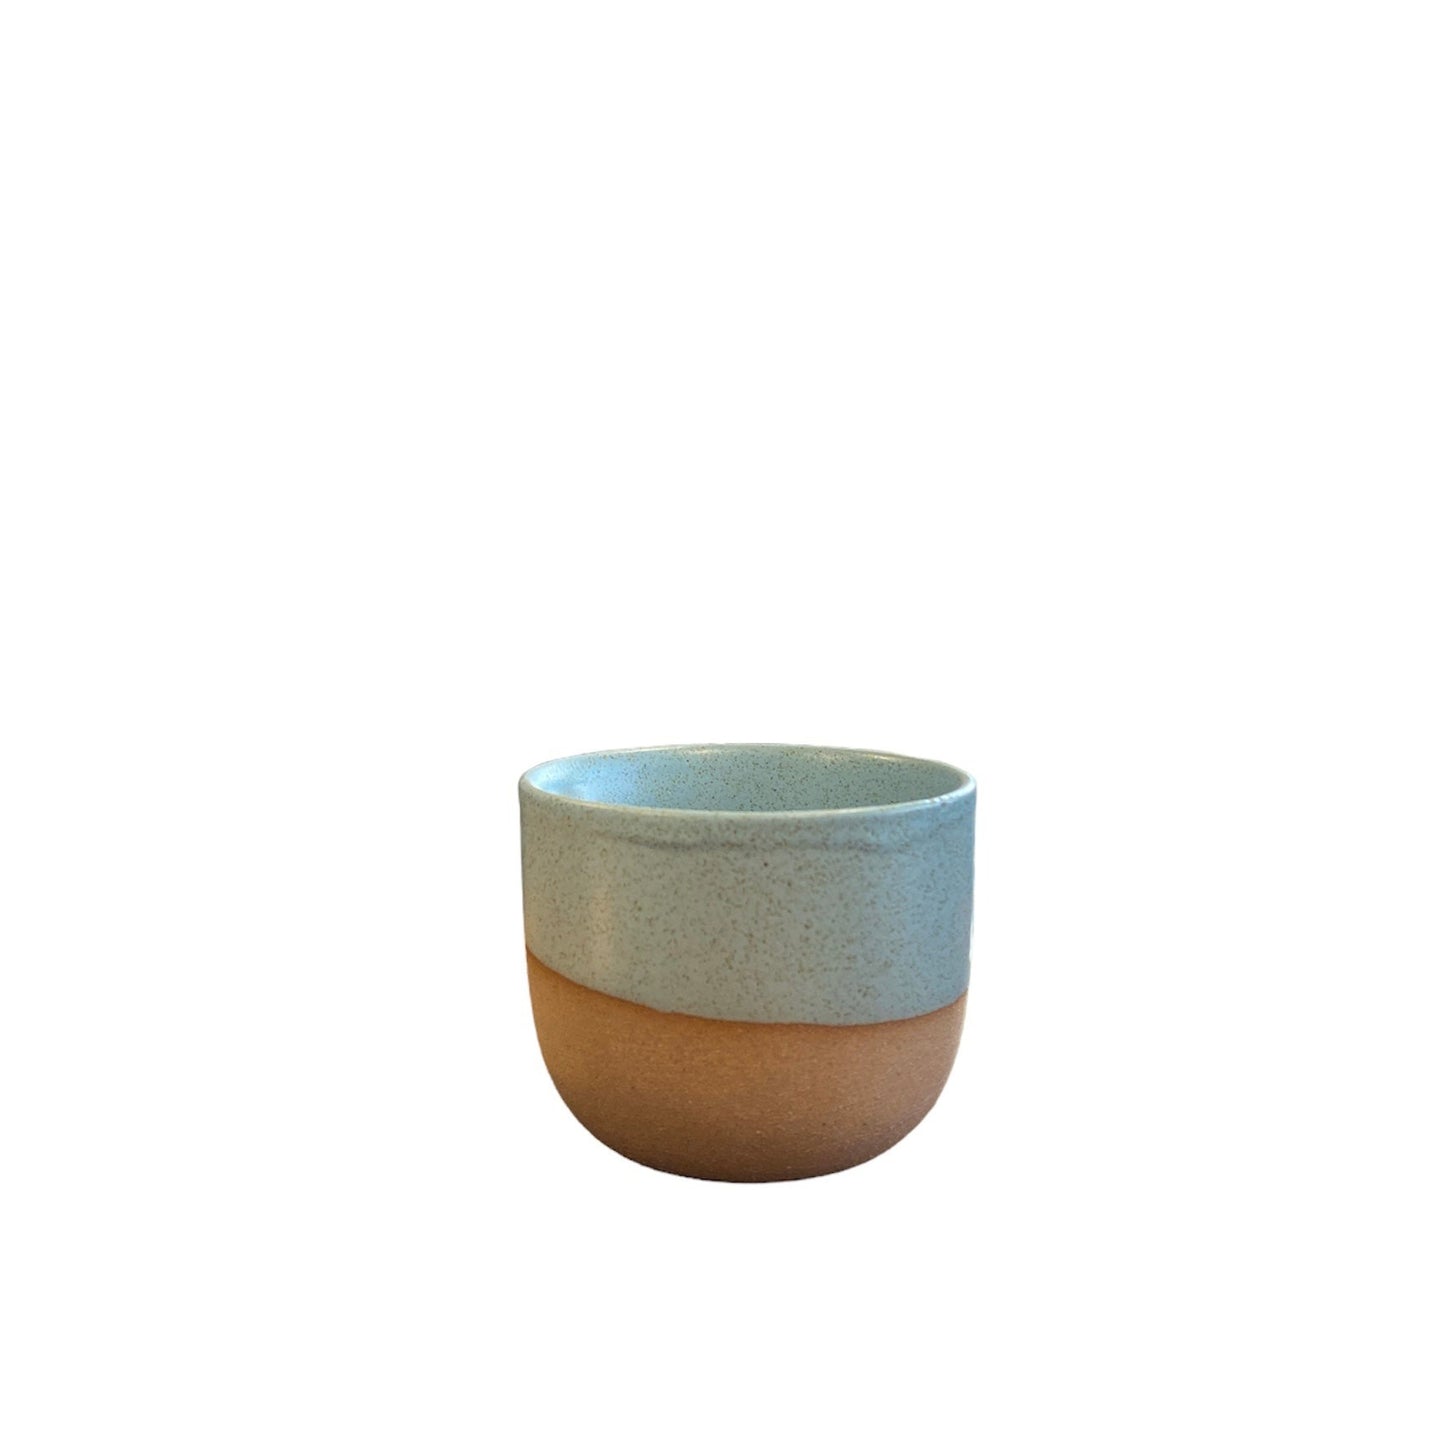 Candle in a ramkin - small